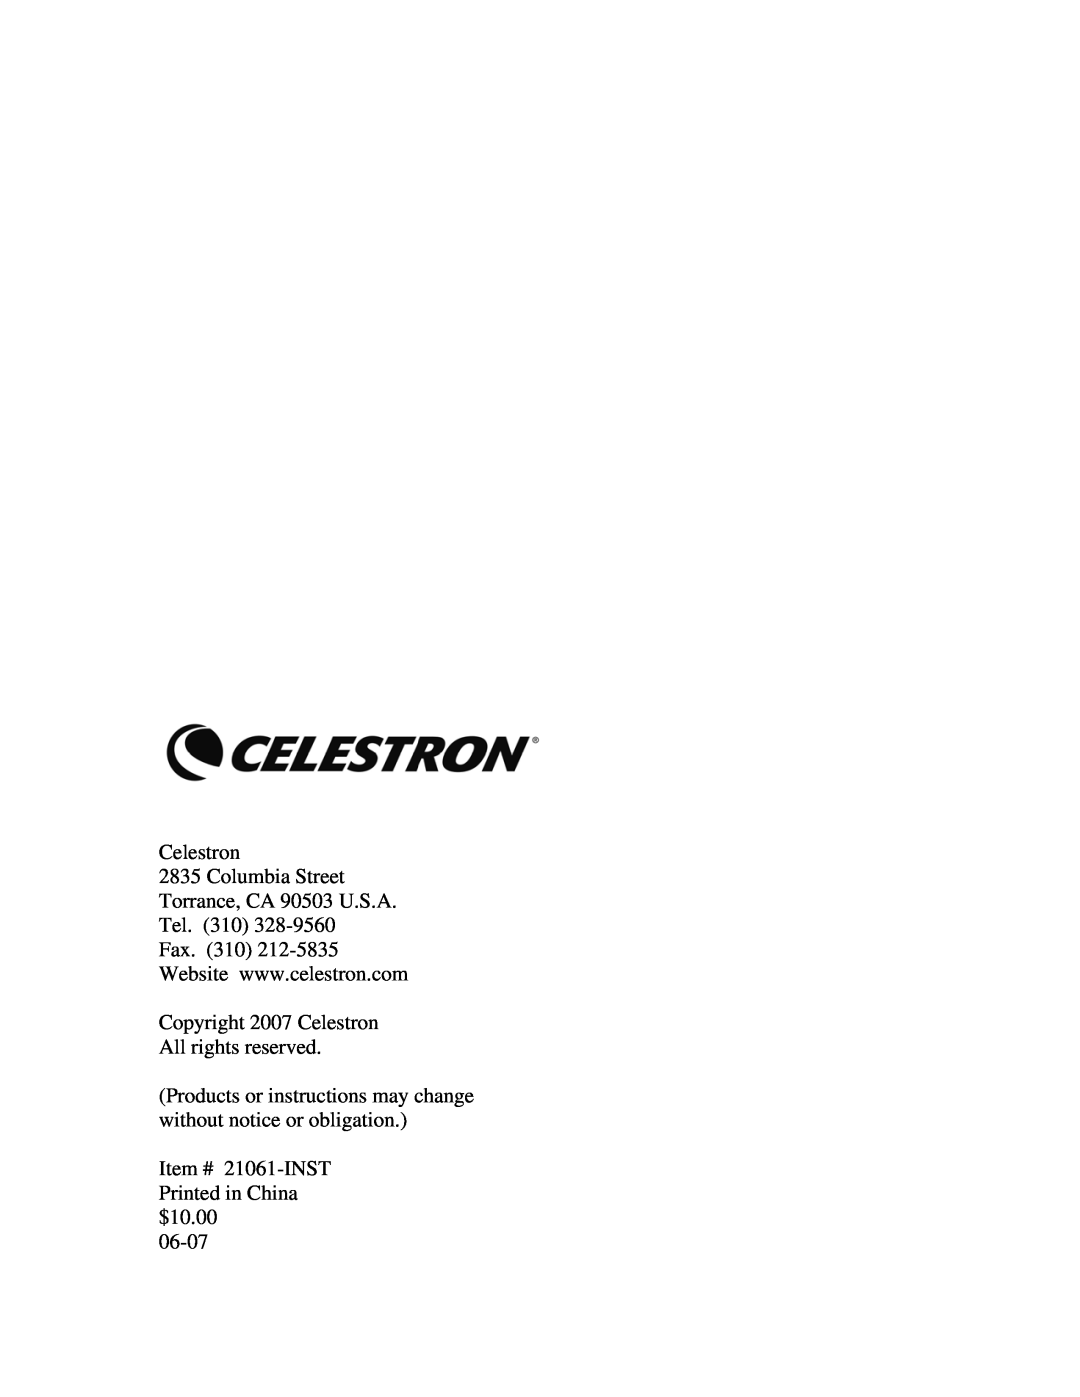 Celestron C21061 manual Copyright 2007 Celestron All rights reserved 